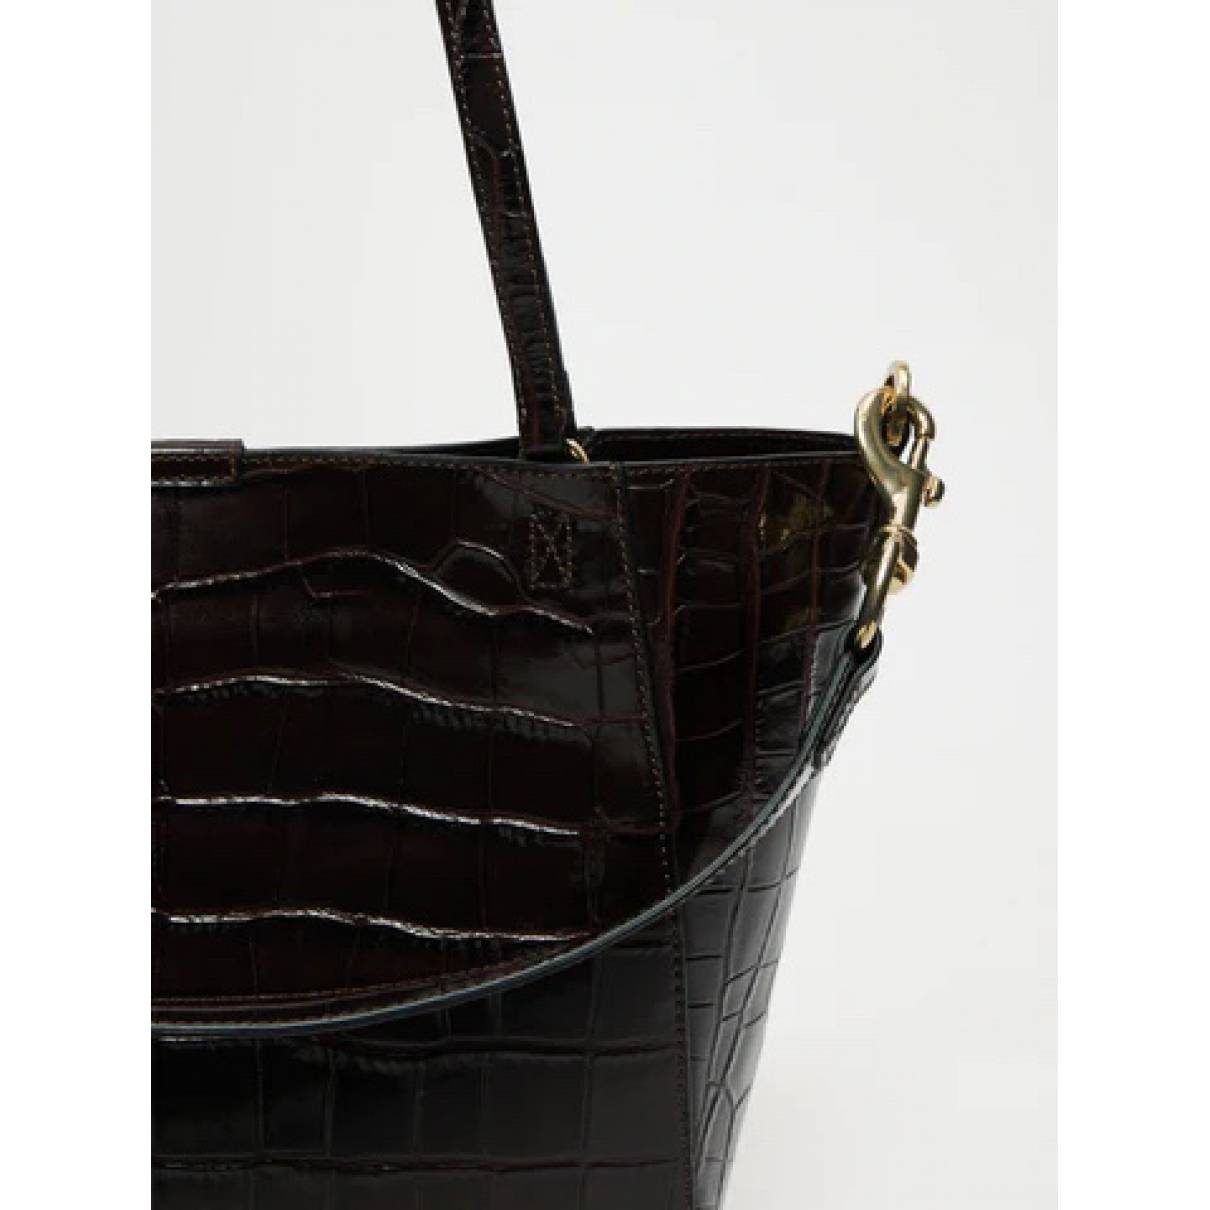 Buy Jigsaw Leather tote online